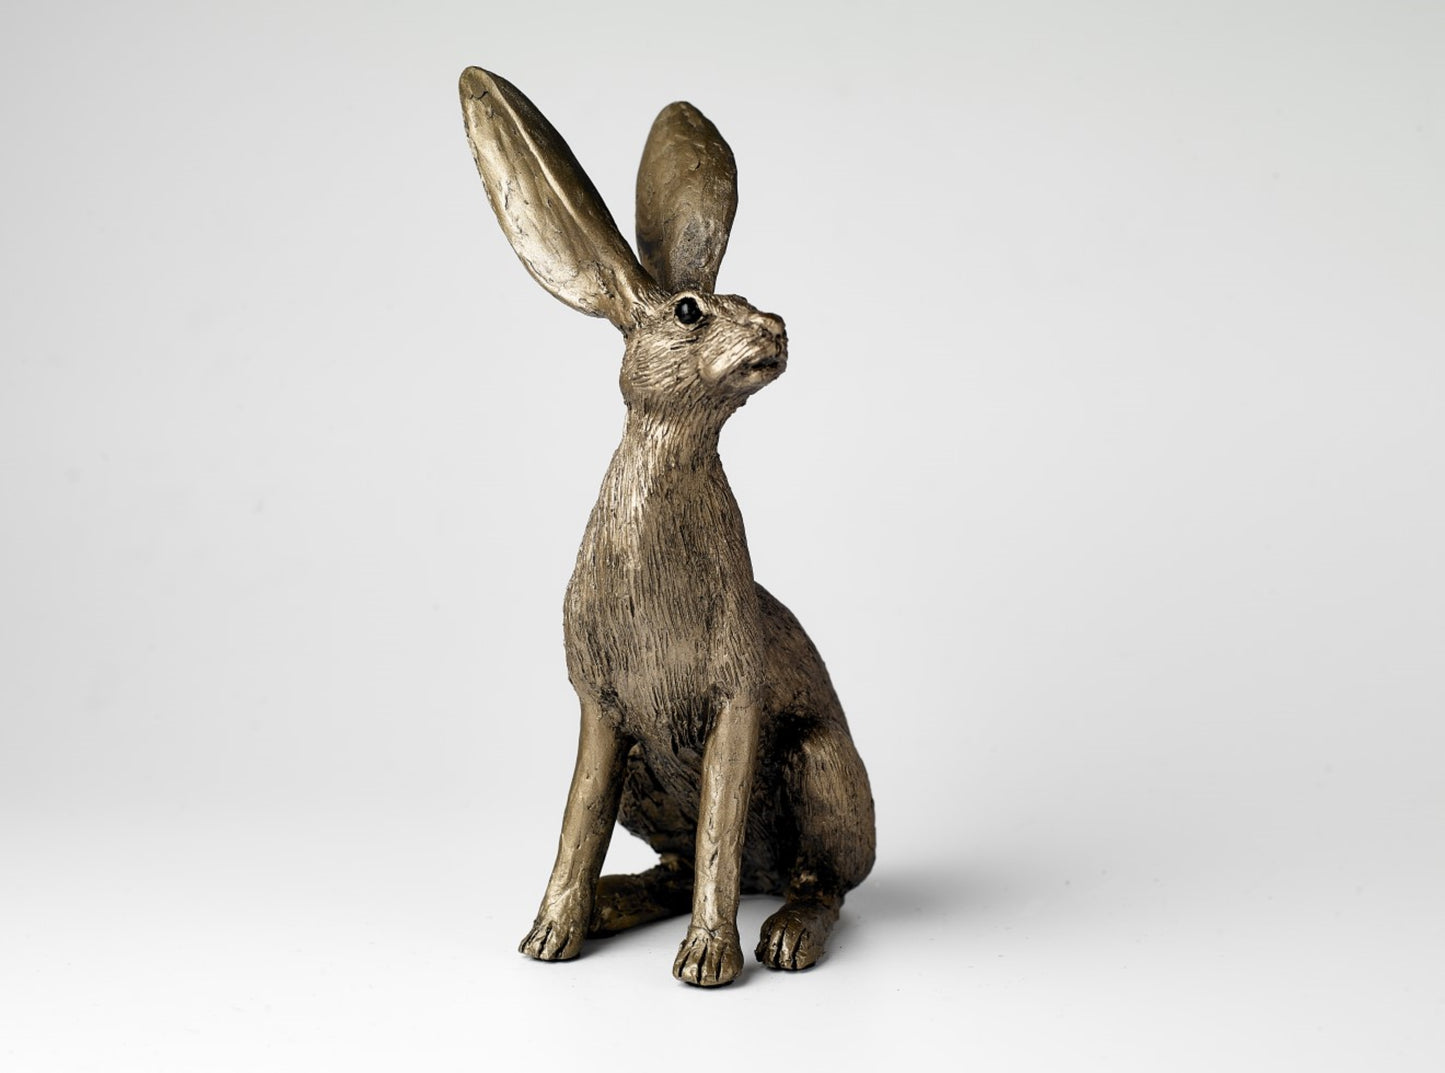 Hare Bronze Figurine by Jonny Sanders Paws Down (Frith Sculpture)